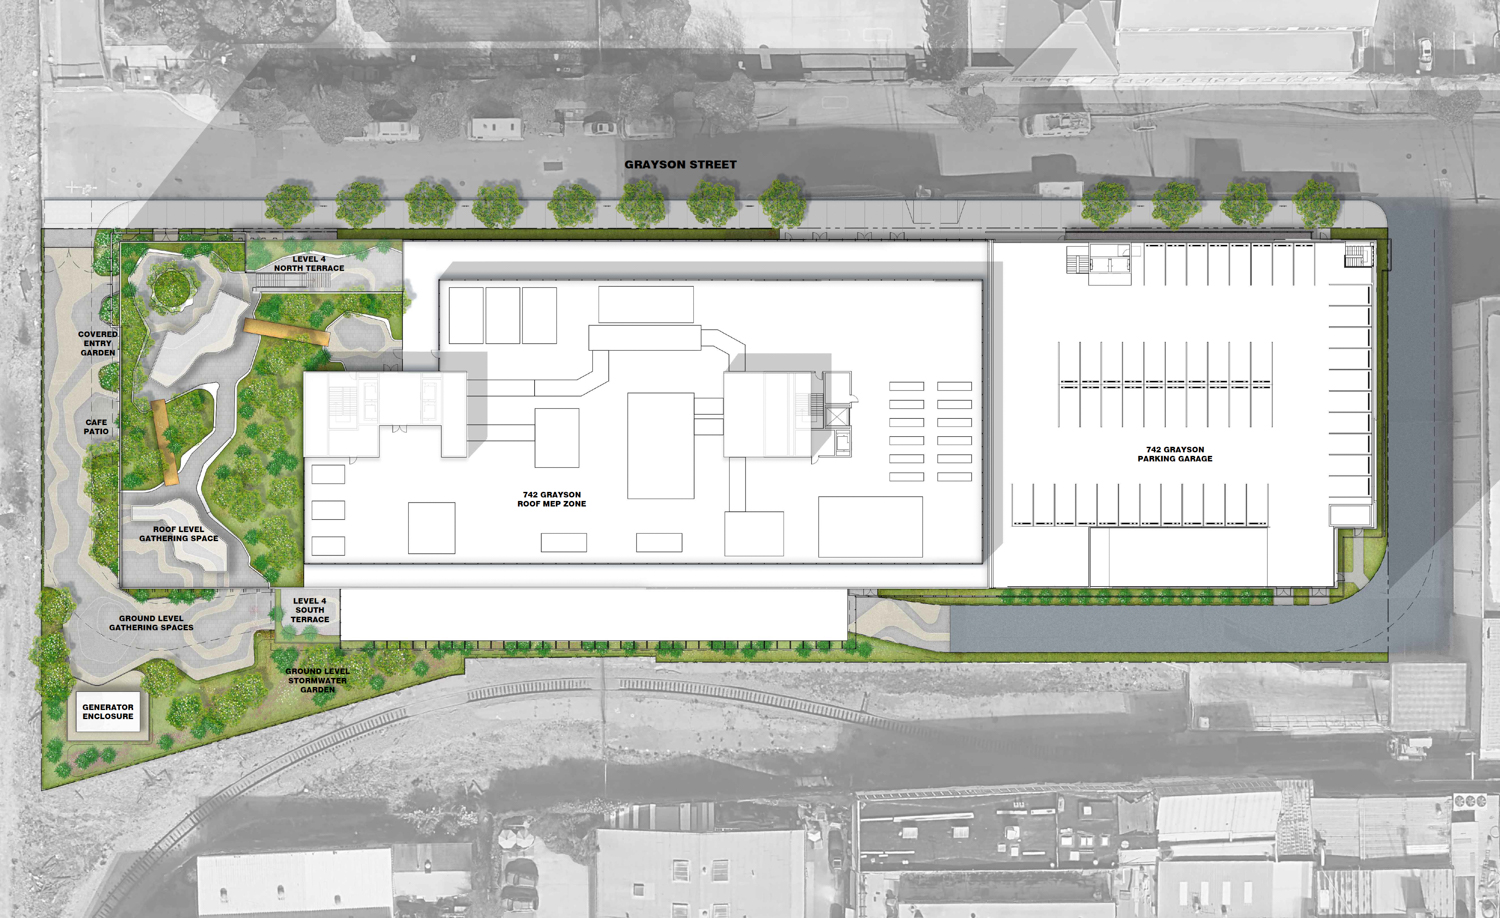 700 Grayson Street site map, rendering by brick.